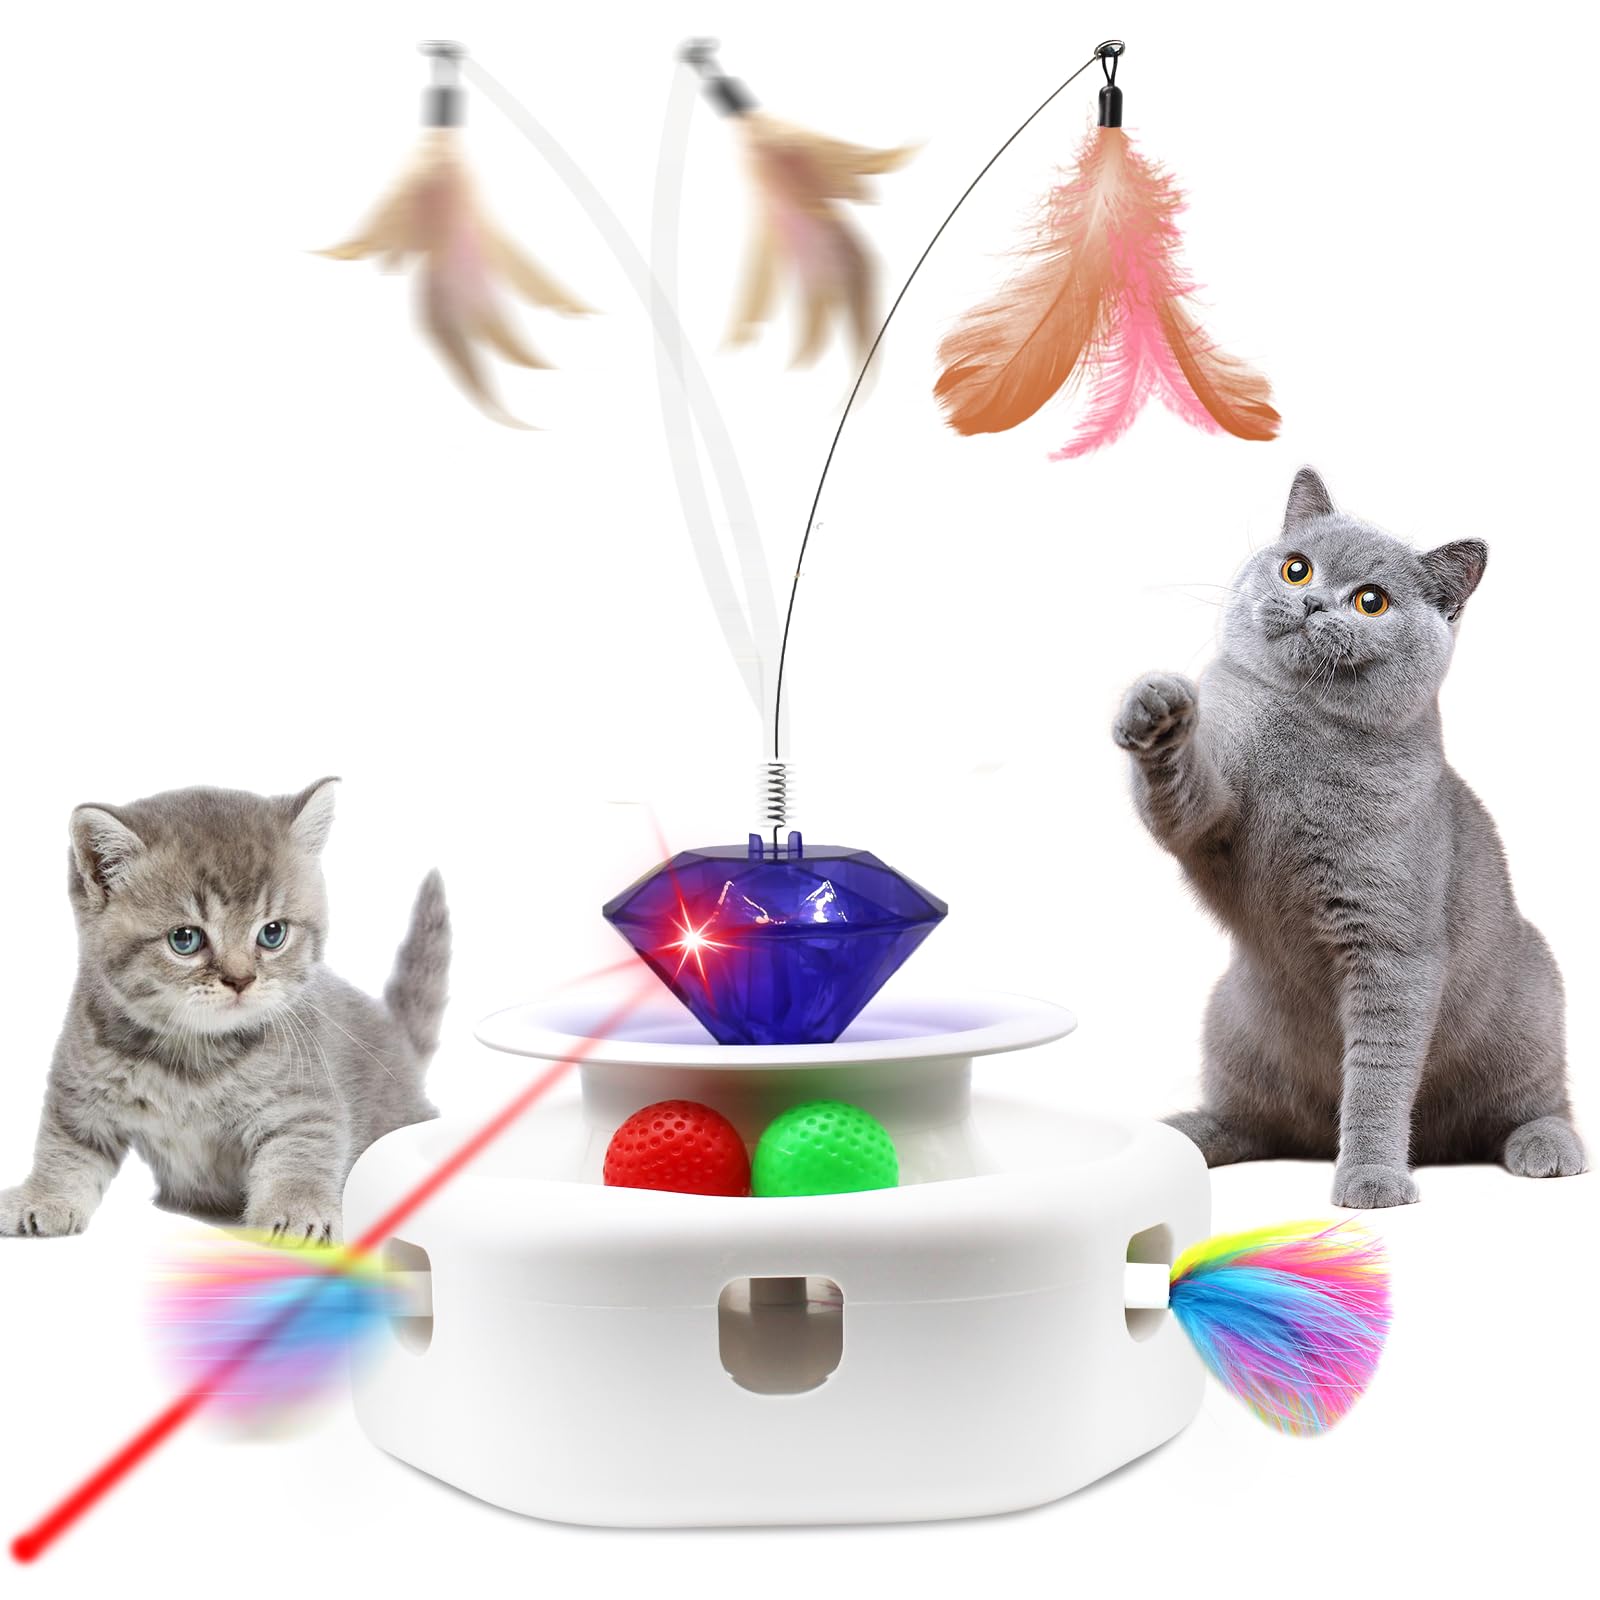 KugobarNe 4 in1 Automatic Laser Cat Toy, Interactive Kitten Toy Cat Laser Pointer Toy, Fluttering Butterfly Electronic Cat Toy, Moving Ambush Feather, Track Balls, Cat interactive Toys for Indoor Cats